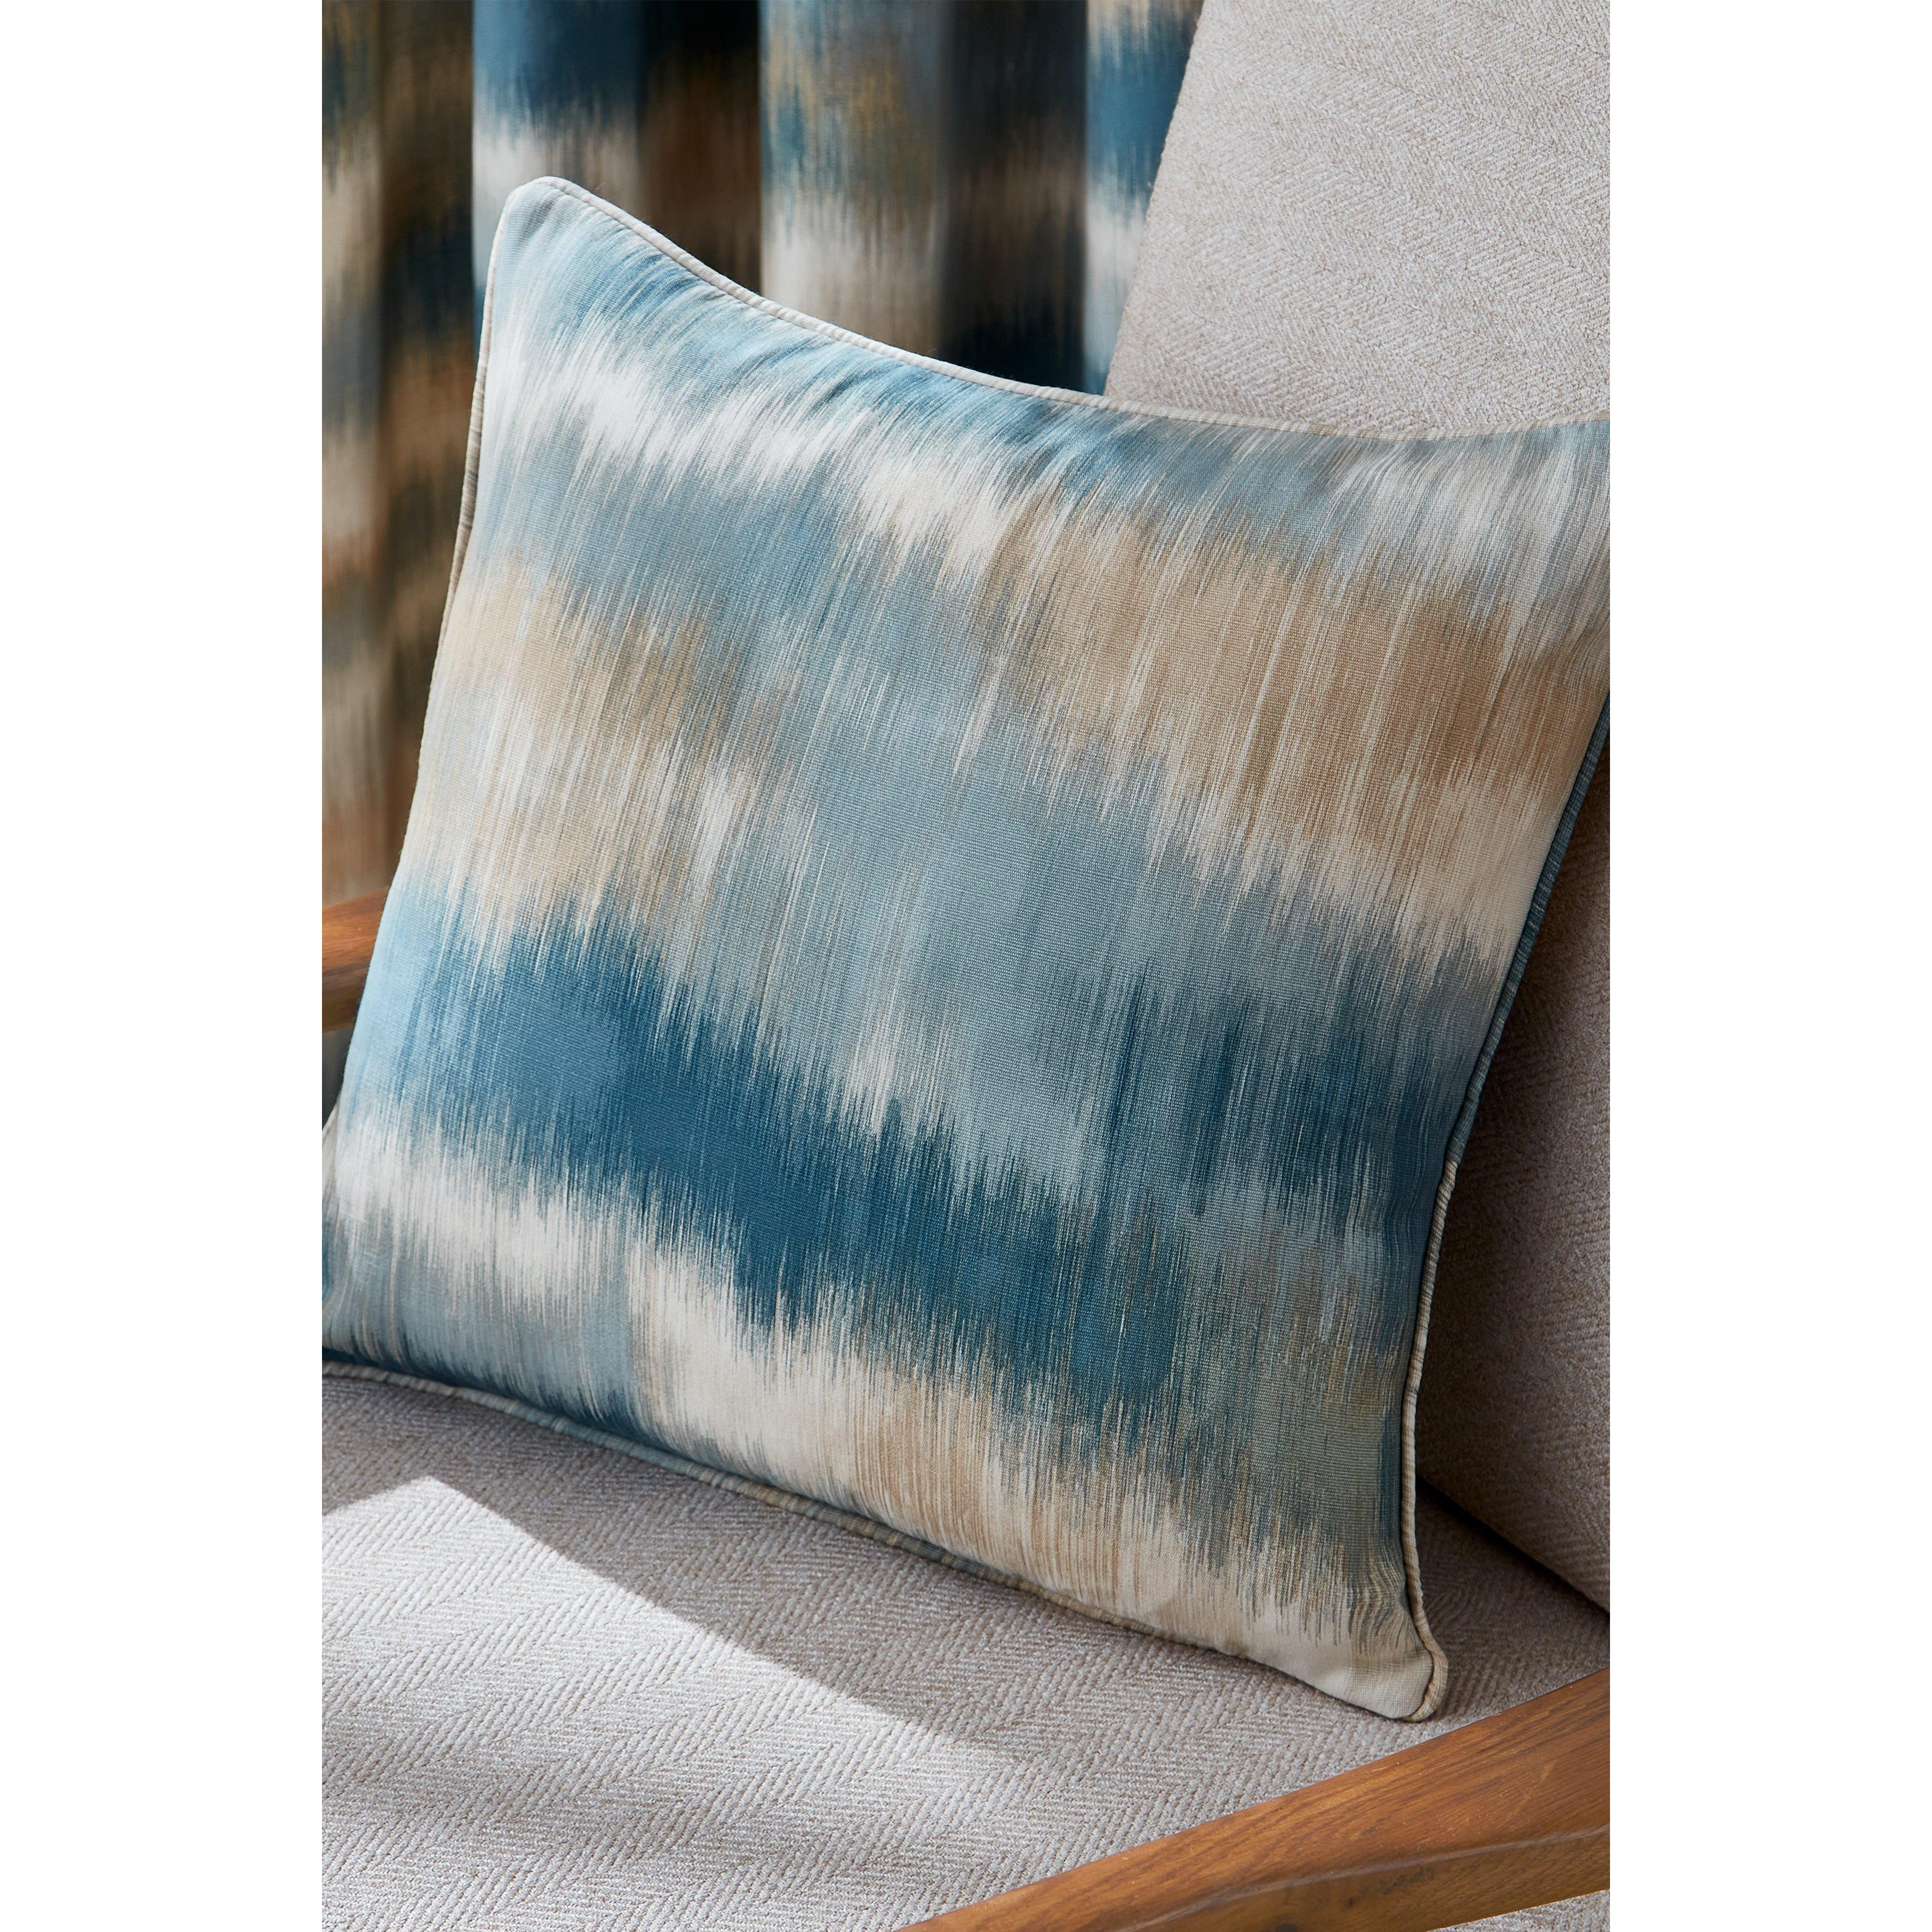 'Ombre Texture' Cushion - image 1